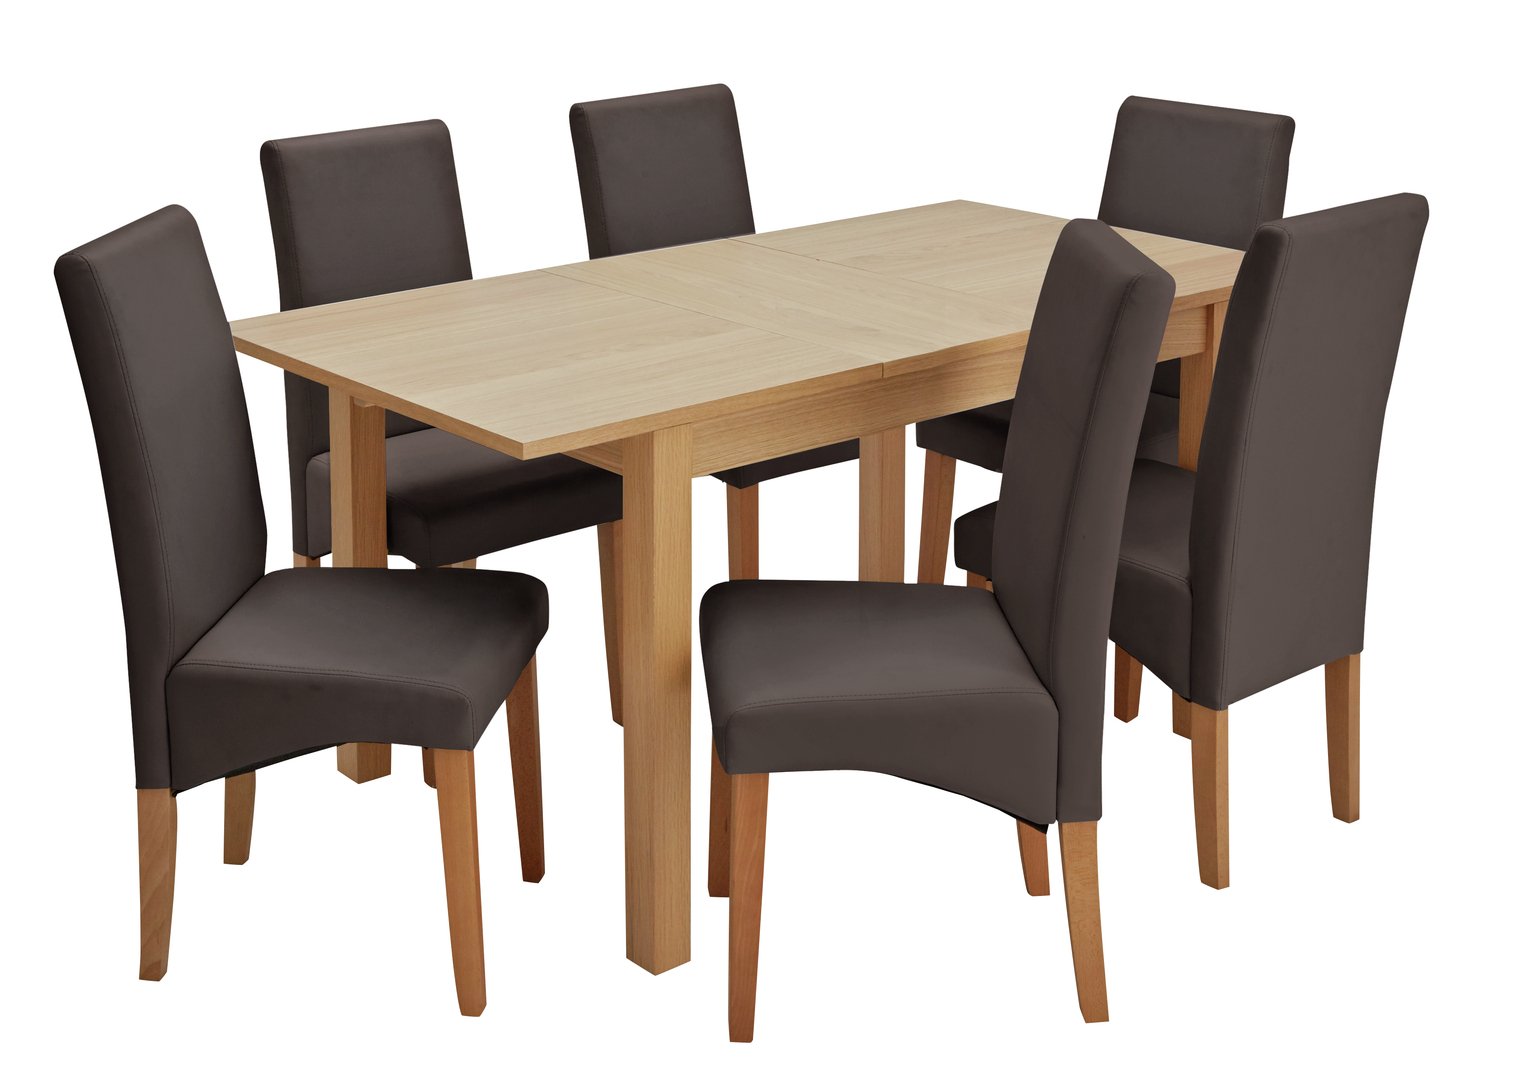 Argos Home Clifton Oak Extending Table & 6 Chocolate Chairs